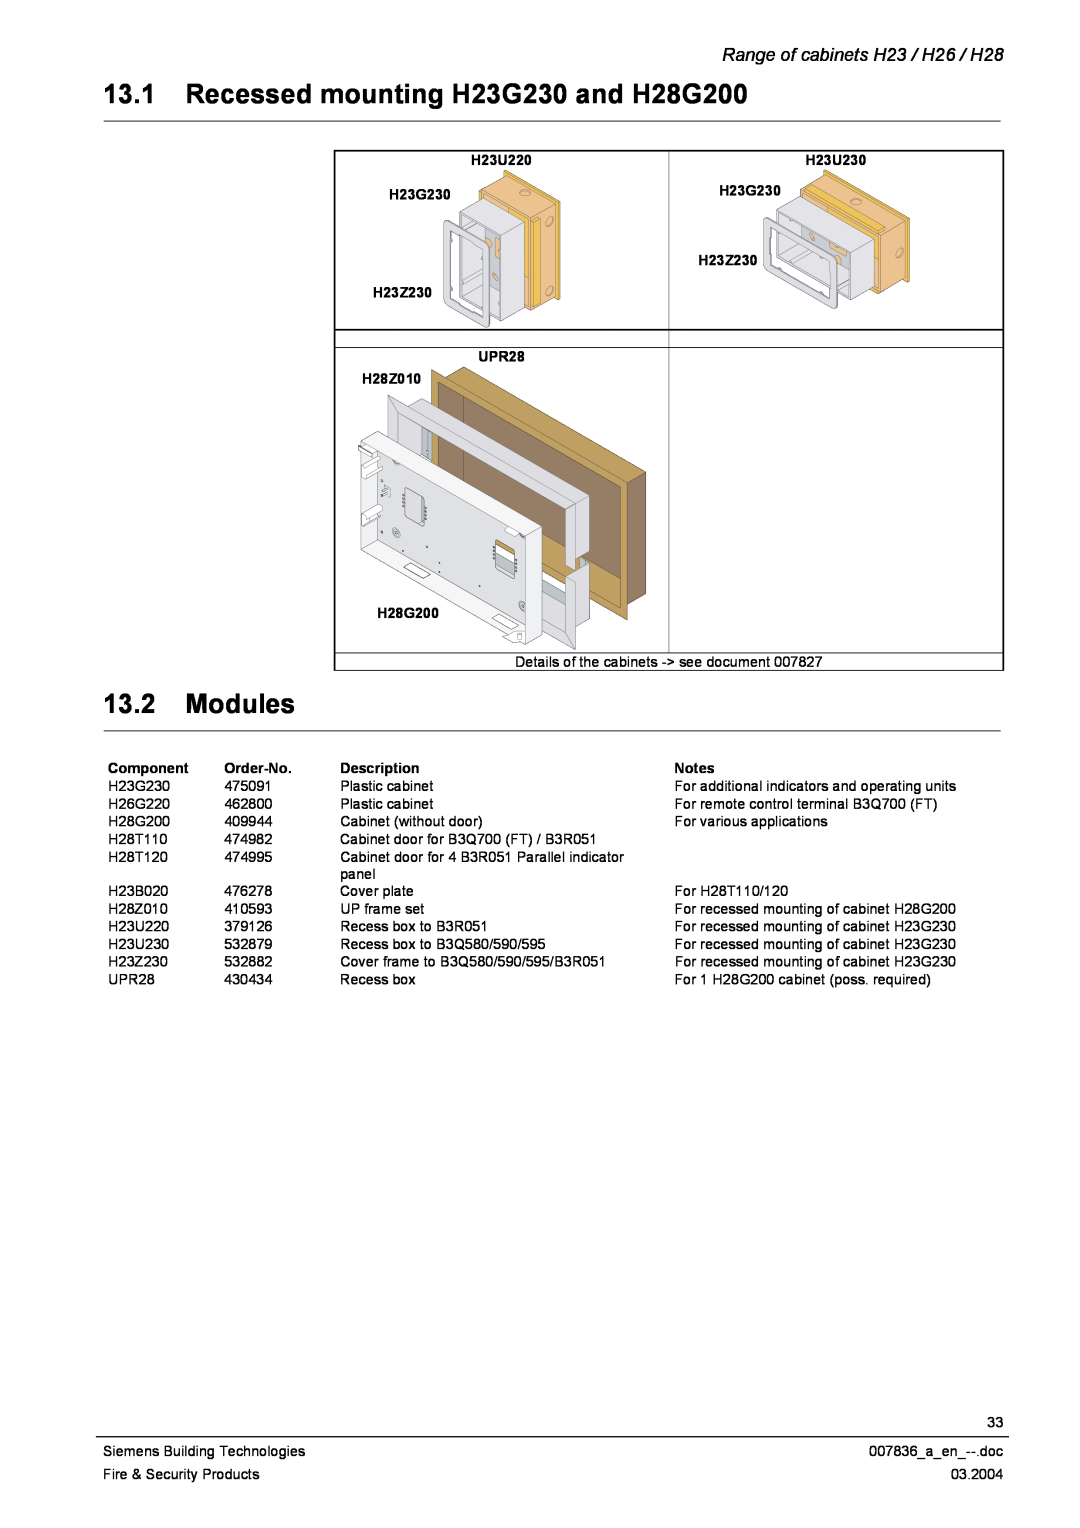 Siemens FC700A manual 13.1Recessed mounting H23G230 and H28G200, 13.2Modules, Range of cabinets H23 / H26 / H28 